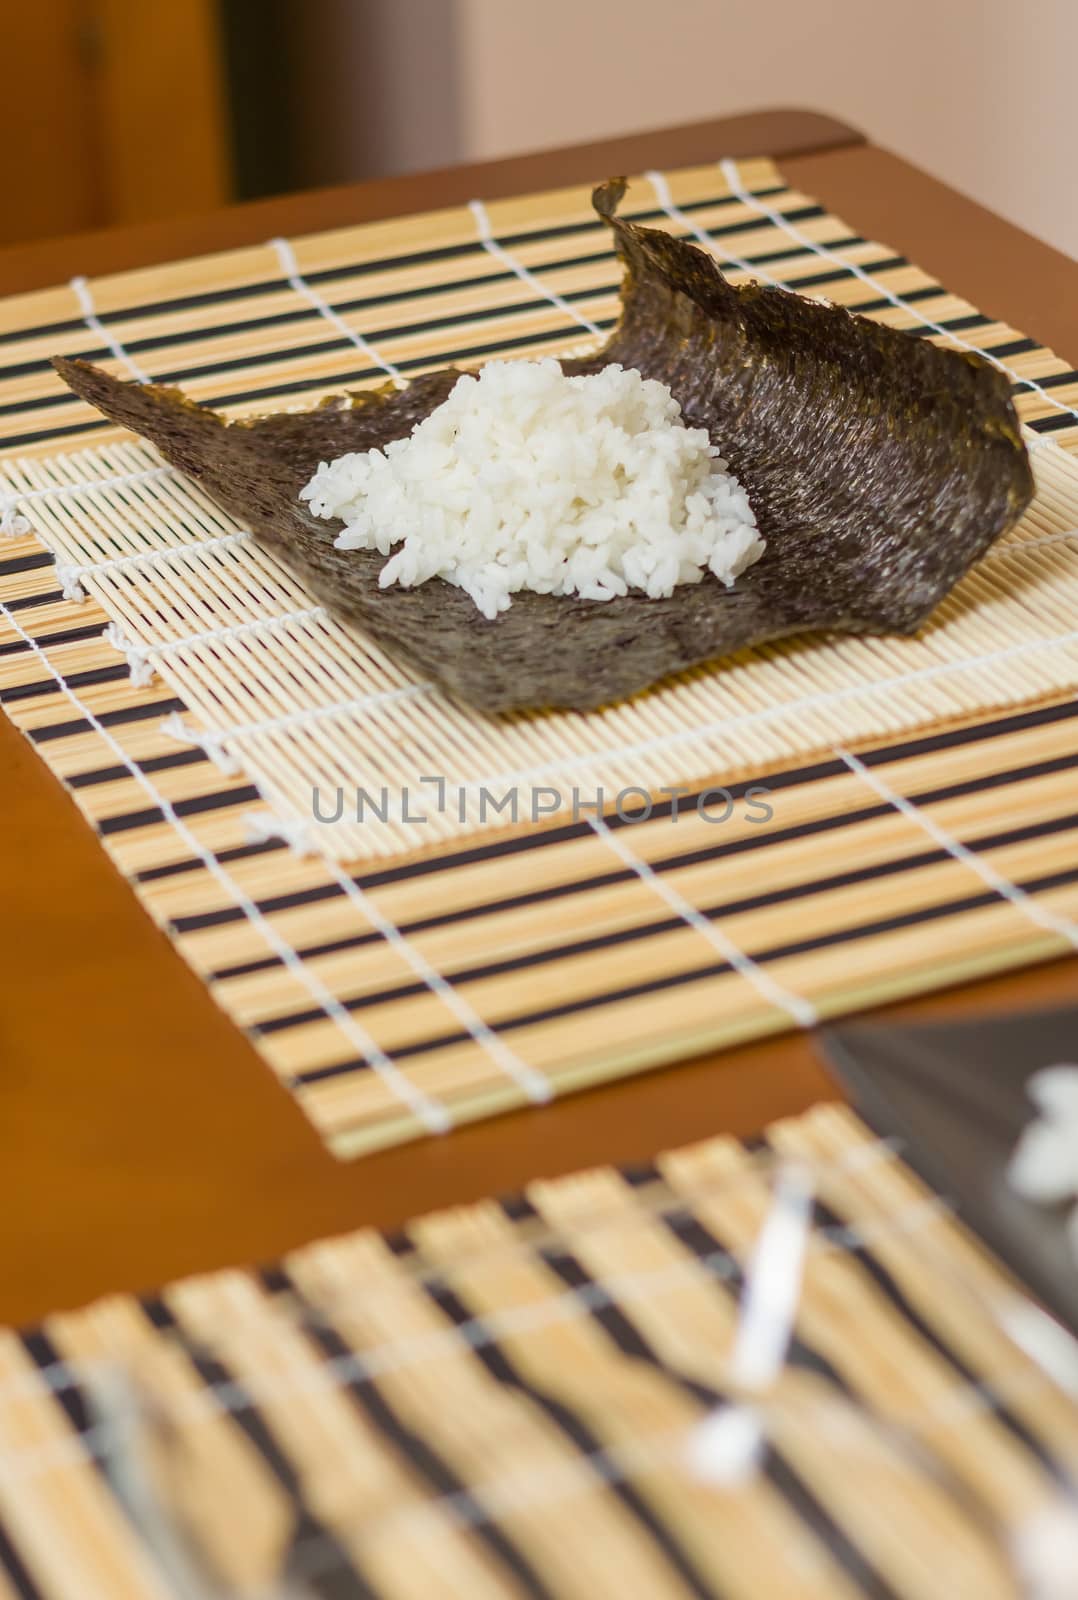 Nori seaweed sheet with rice above to make sushi by doble.d